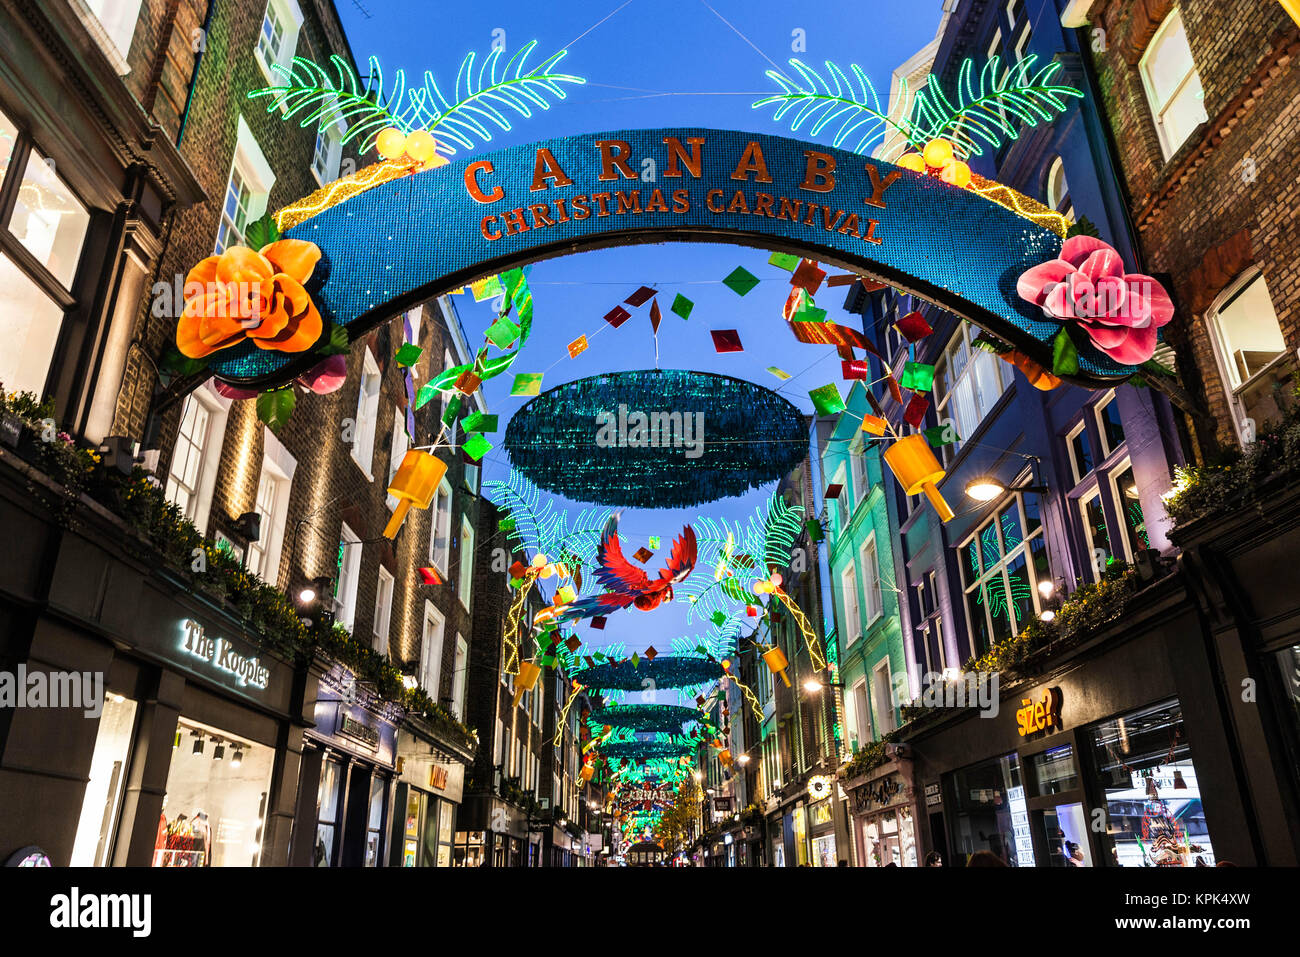 Carnaval de Noël, Décorations Carnaby Carnaby Street, Londres, Angleterre, Royaume-Uni. Banque D'Images